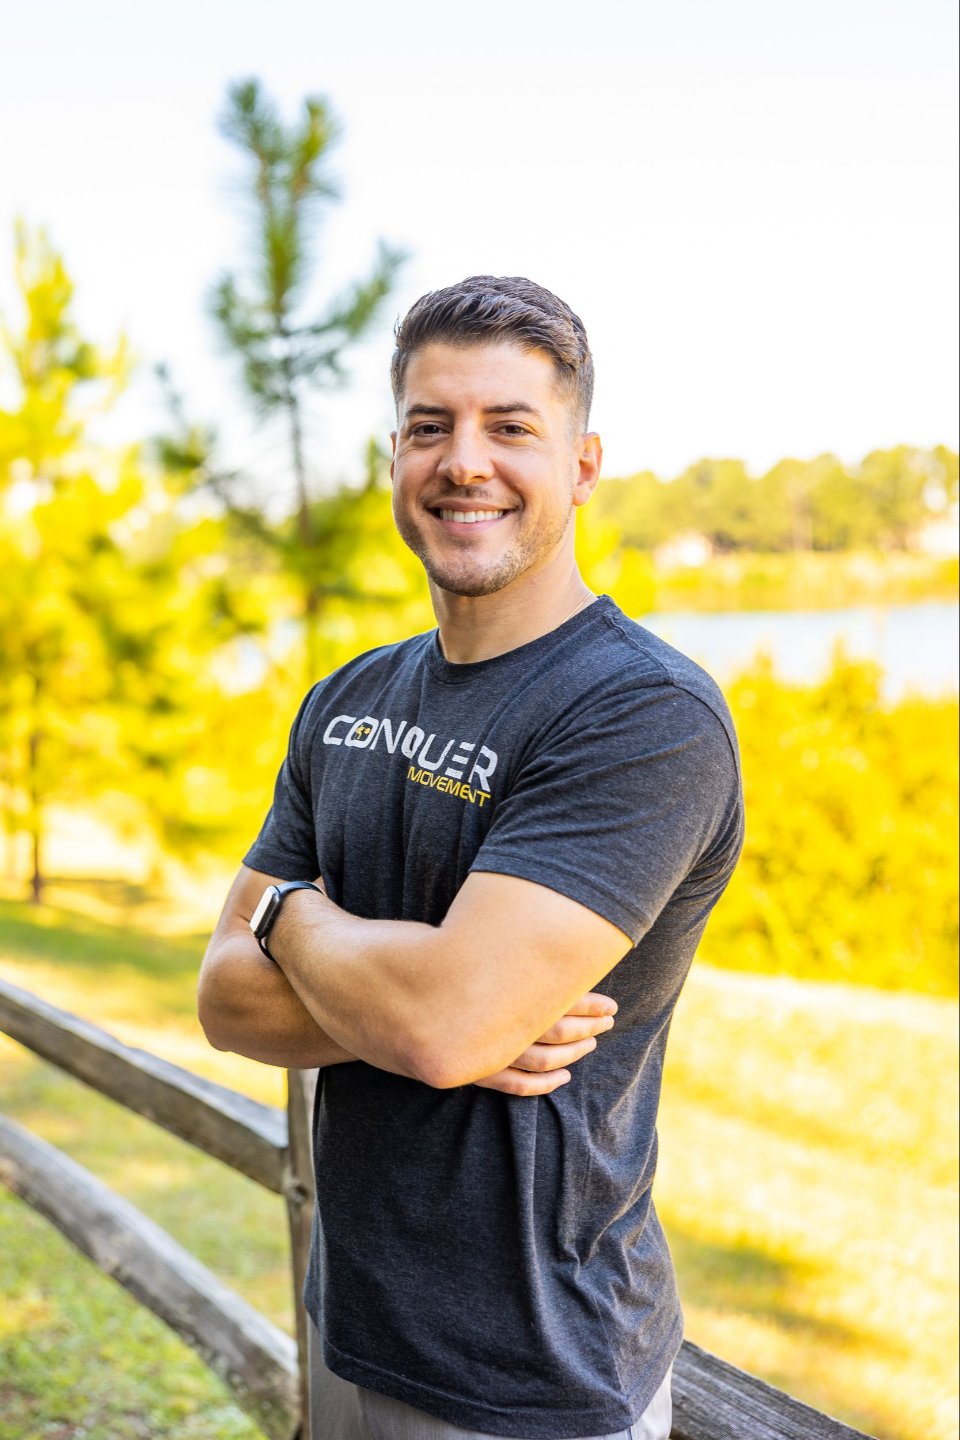 Steven Solecki Wilmington Physical Therapy - Conquer Movement PT